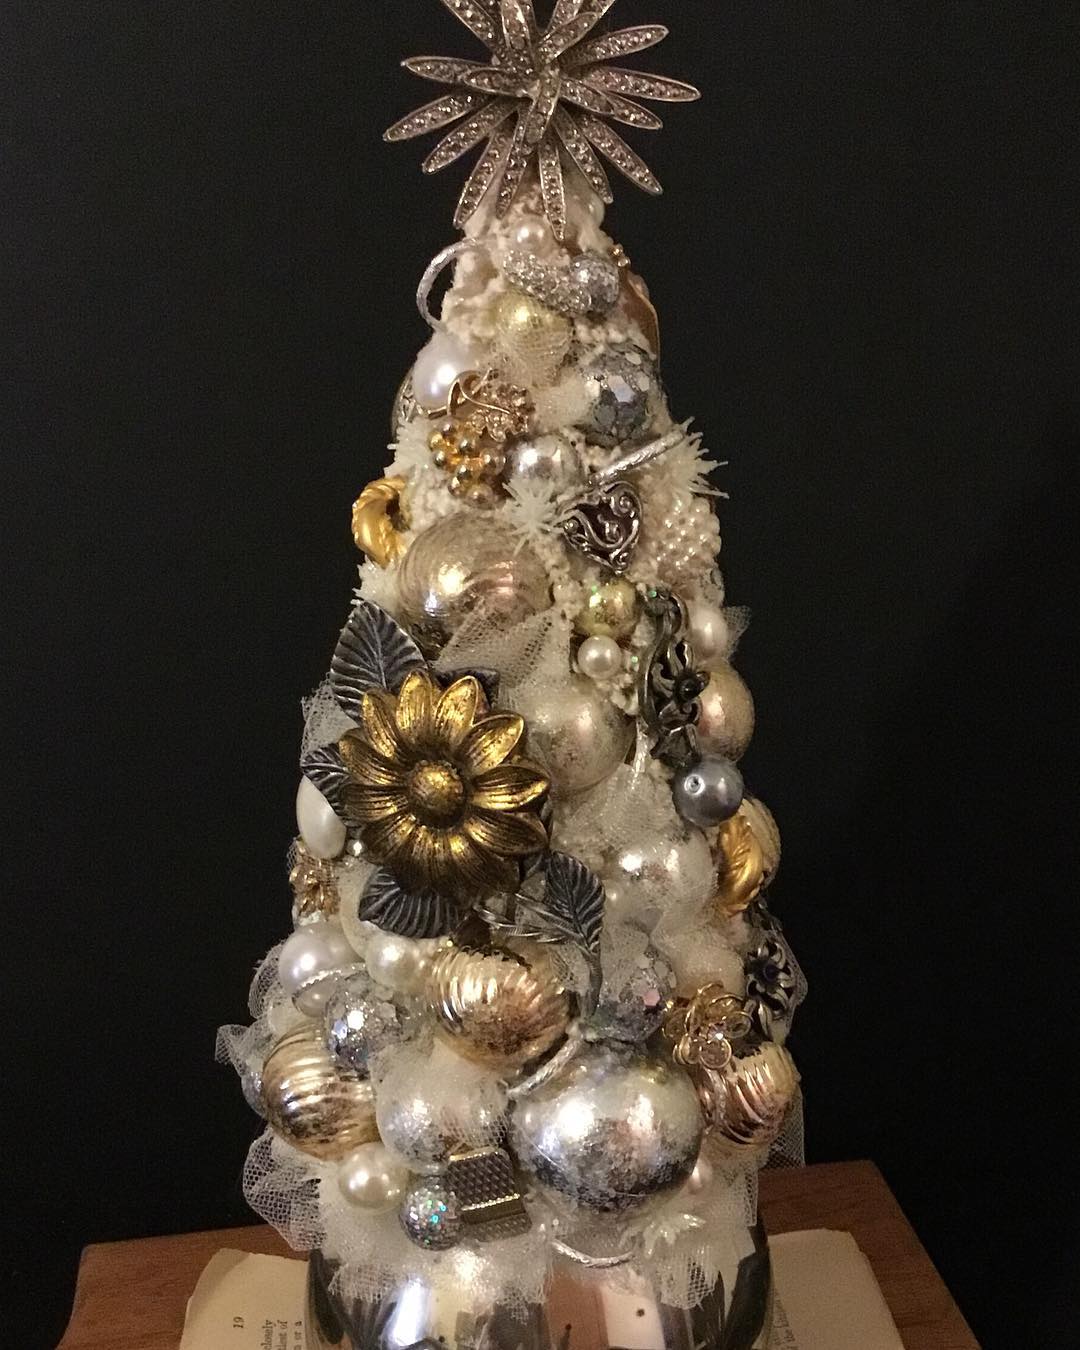 Silver and gold Christmas theme!